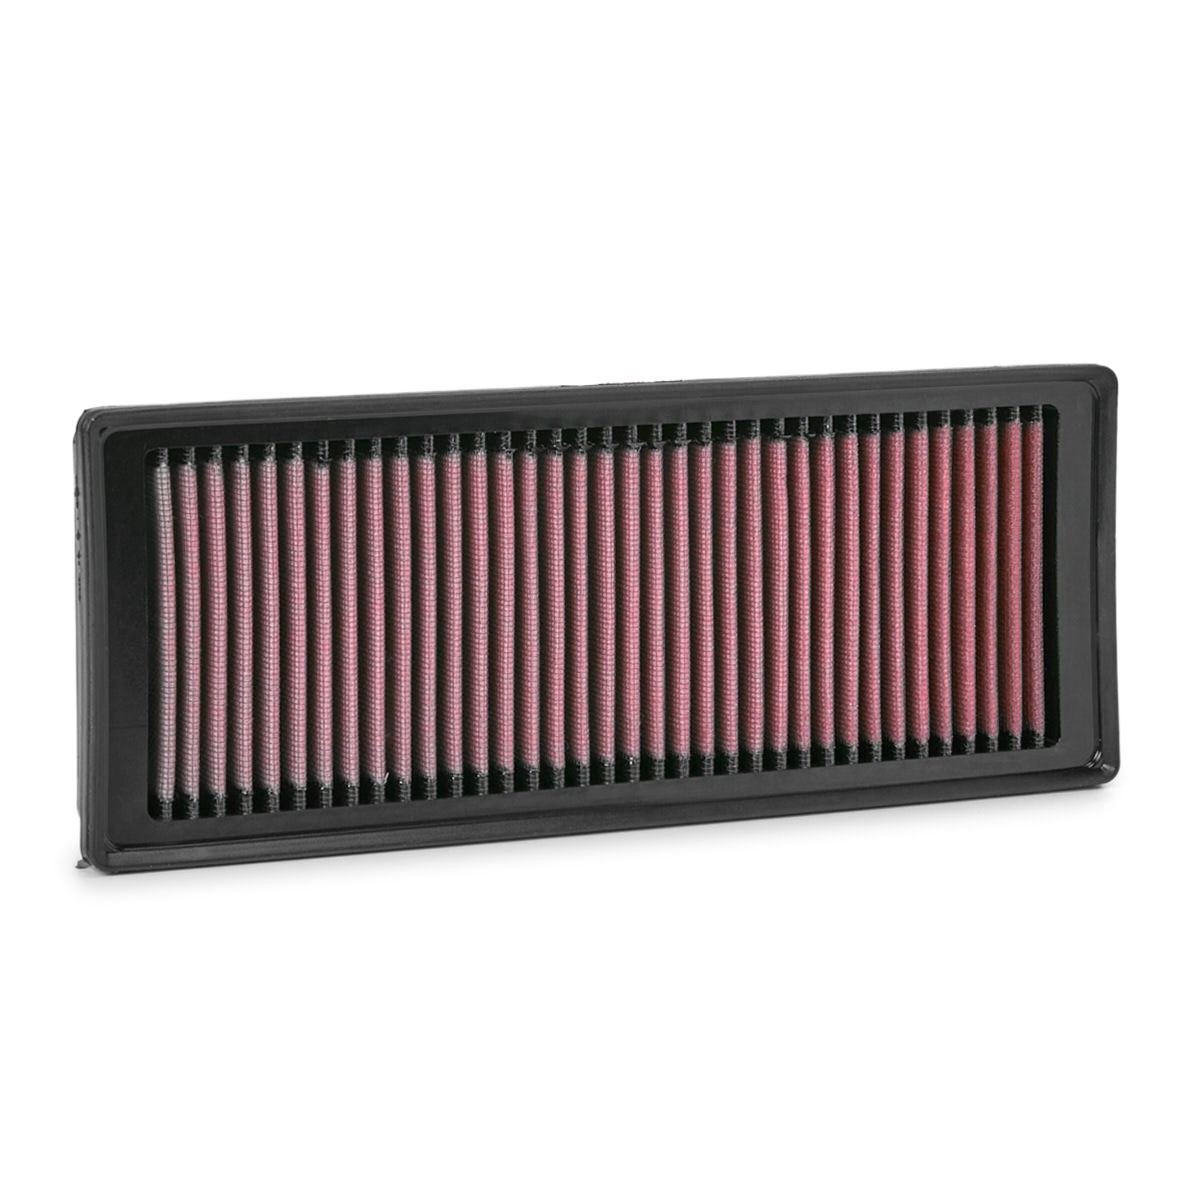 K&N Filters 40mm, 127mm, 321mm, Square, Long-life Filter Length: 321mm, Width: 127mm, Height: 40mm Engine air filter 33-2945 buy